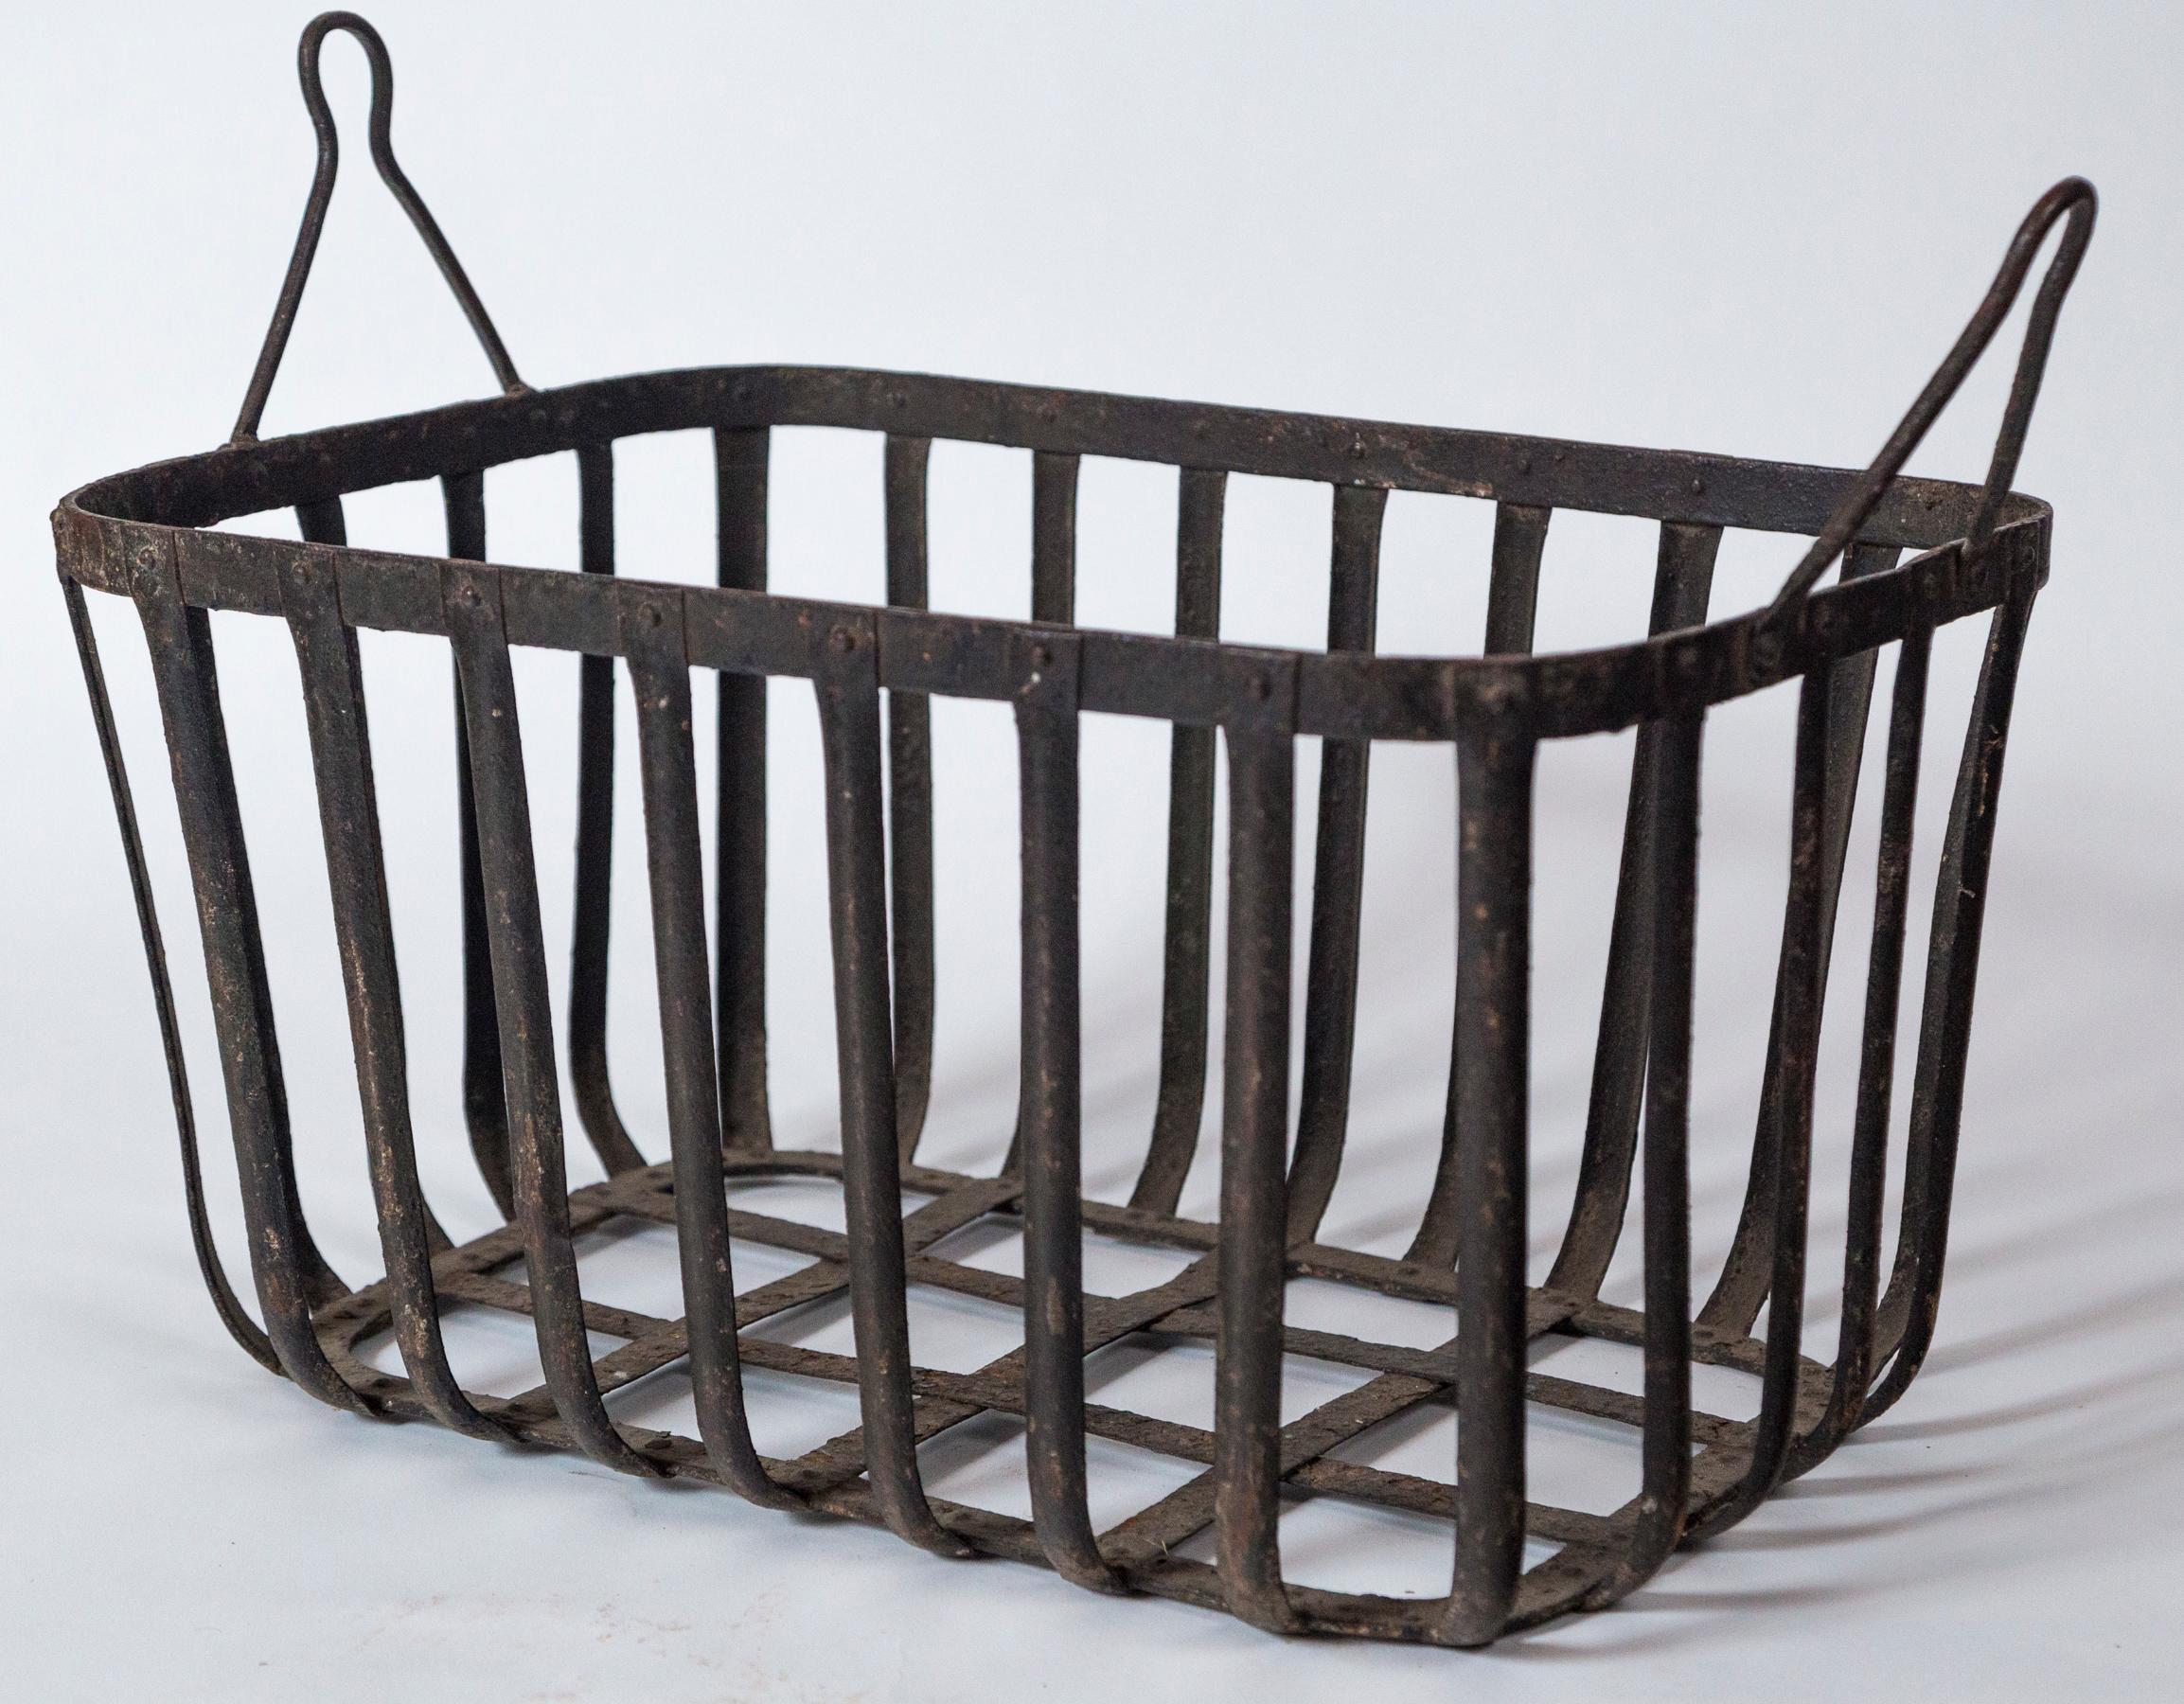 Vintage iron field basket, 20th century. A heavy iron basket that was utilized for harvesting. The handles attached to mechanized equipment. Riveted construction with aged surface.